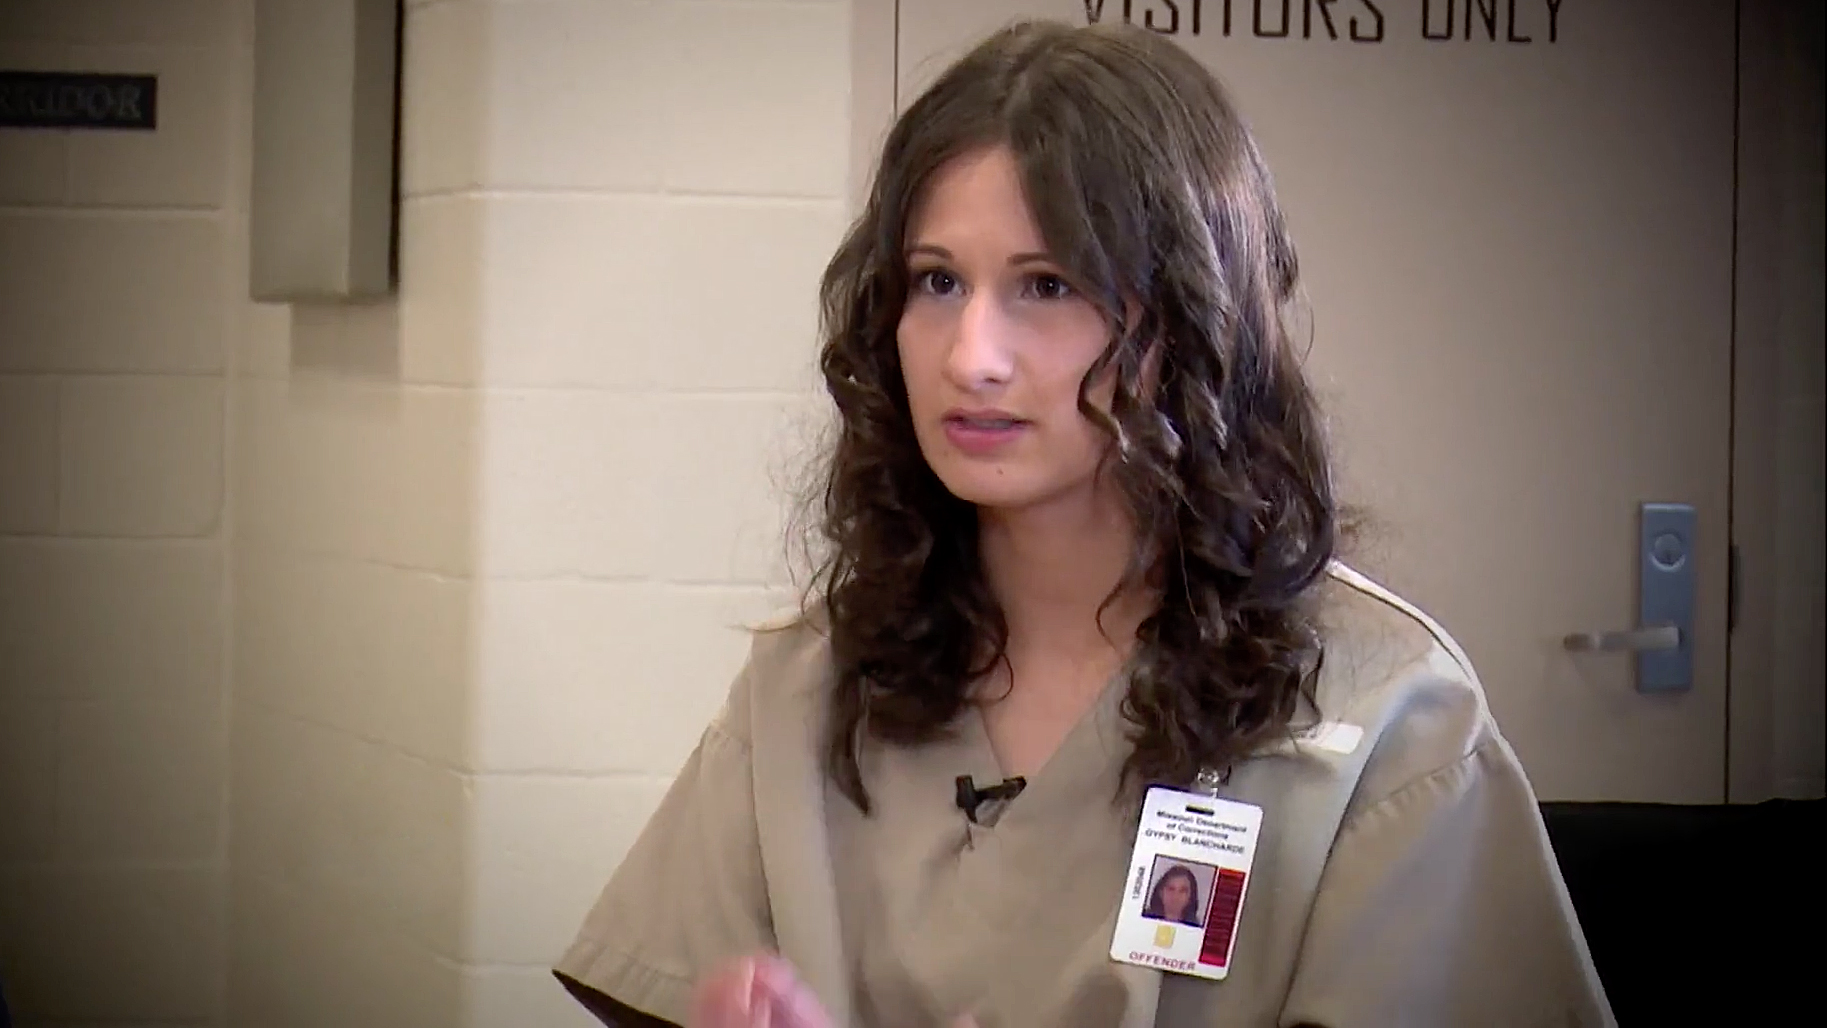 Gypsy Rose Blanchard Will Have an In-Prison Wedding to Fiance Ken - Top